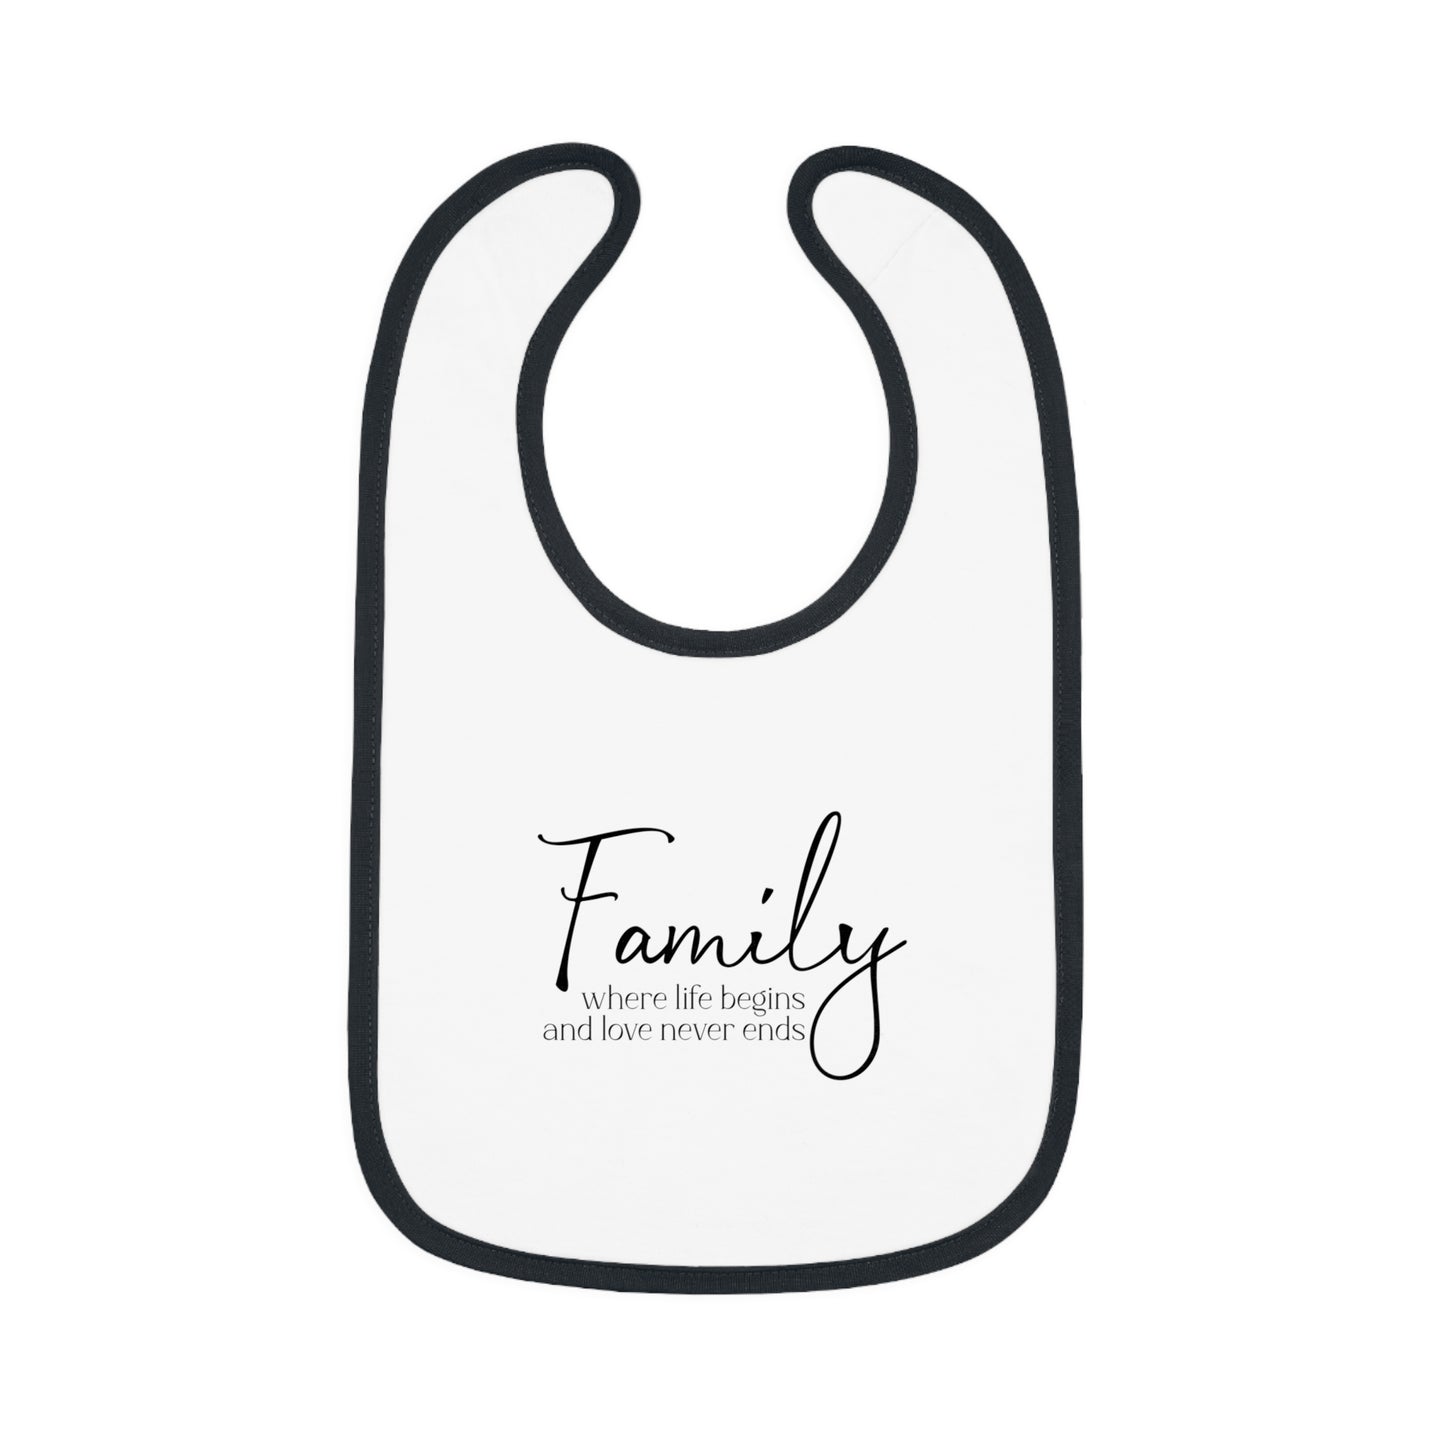 Family... Where Life Begins and Love Never Ends - Baby Contrast Trim Jersey Bib